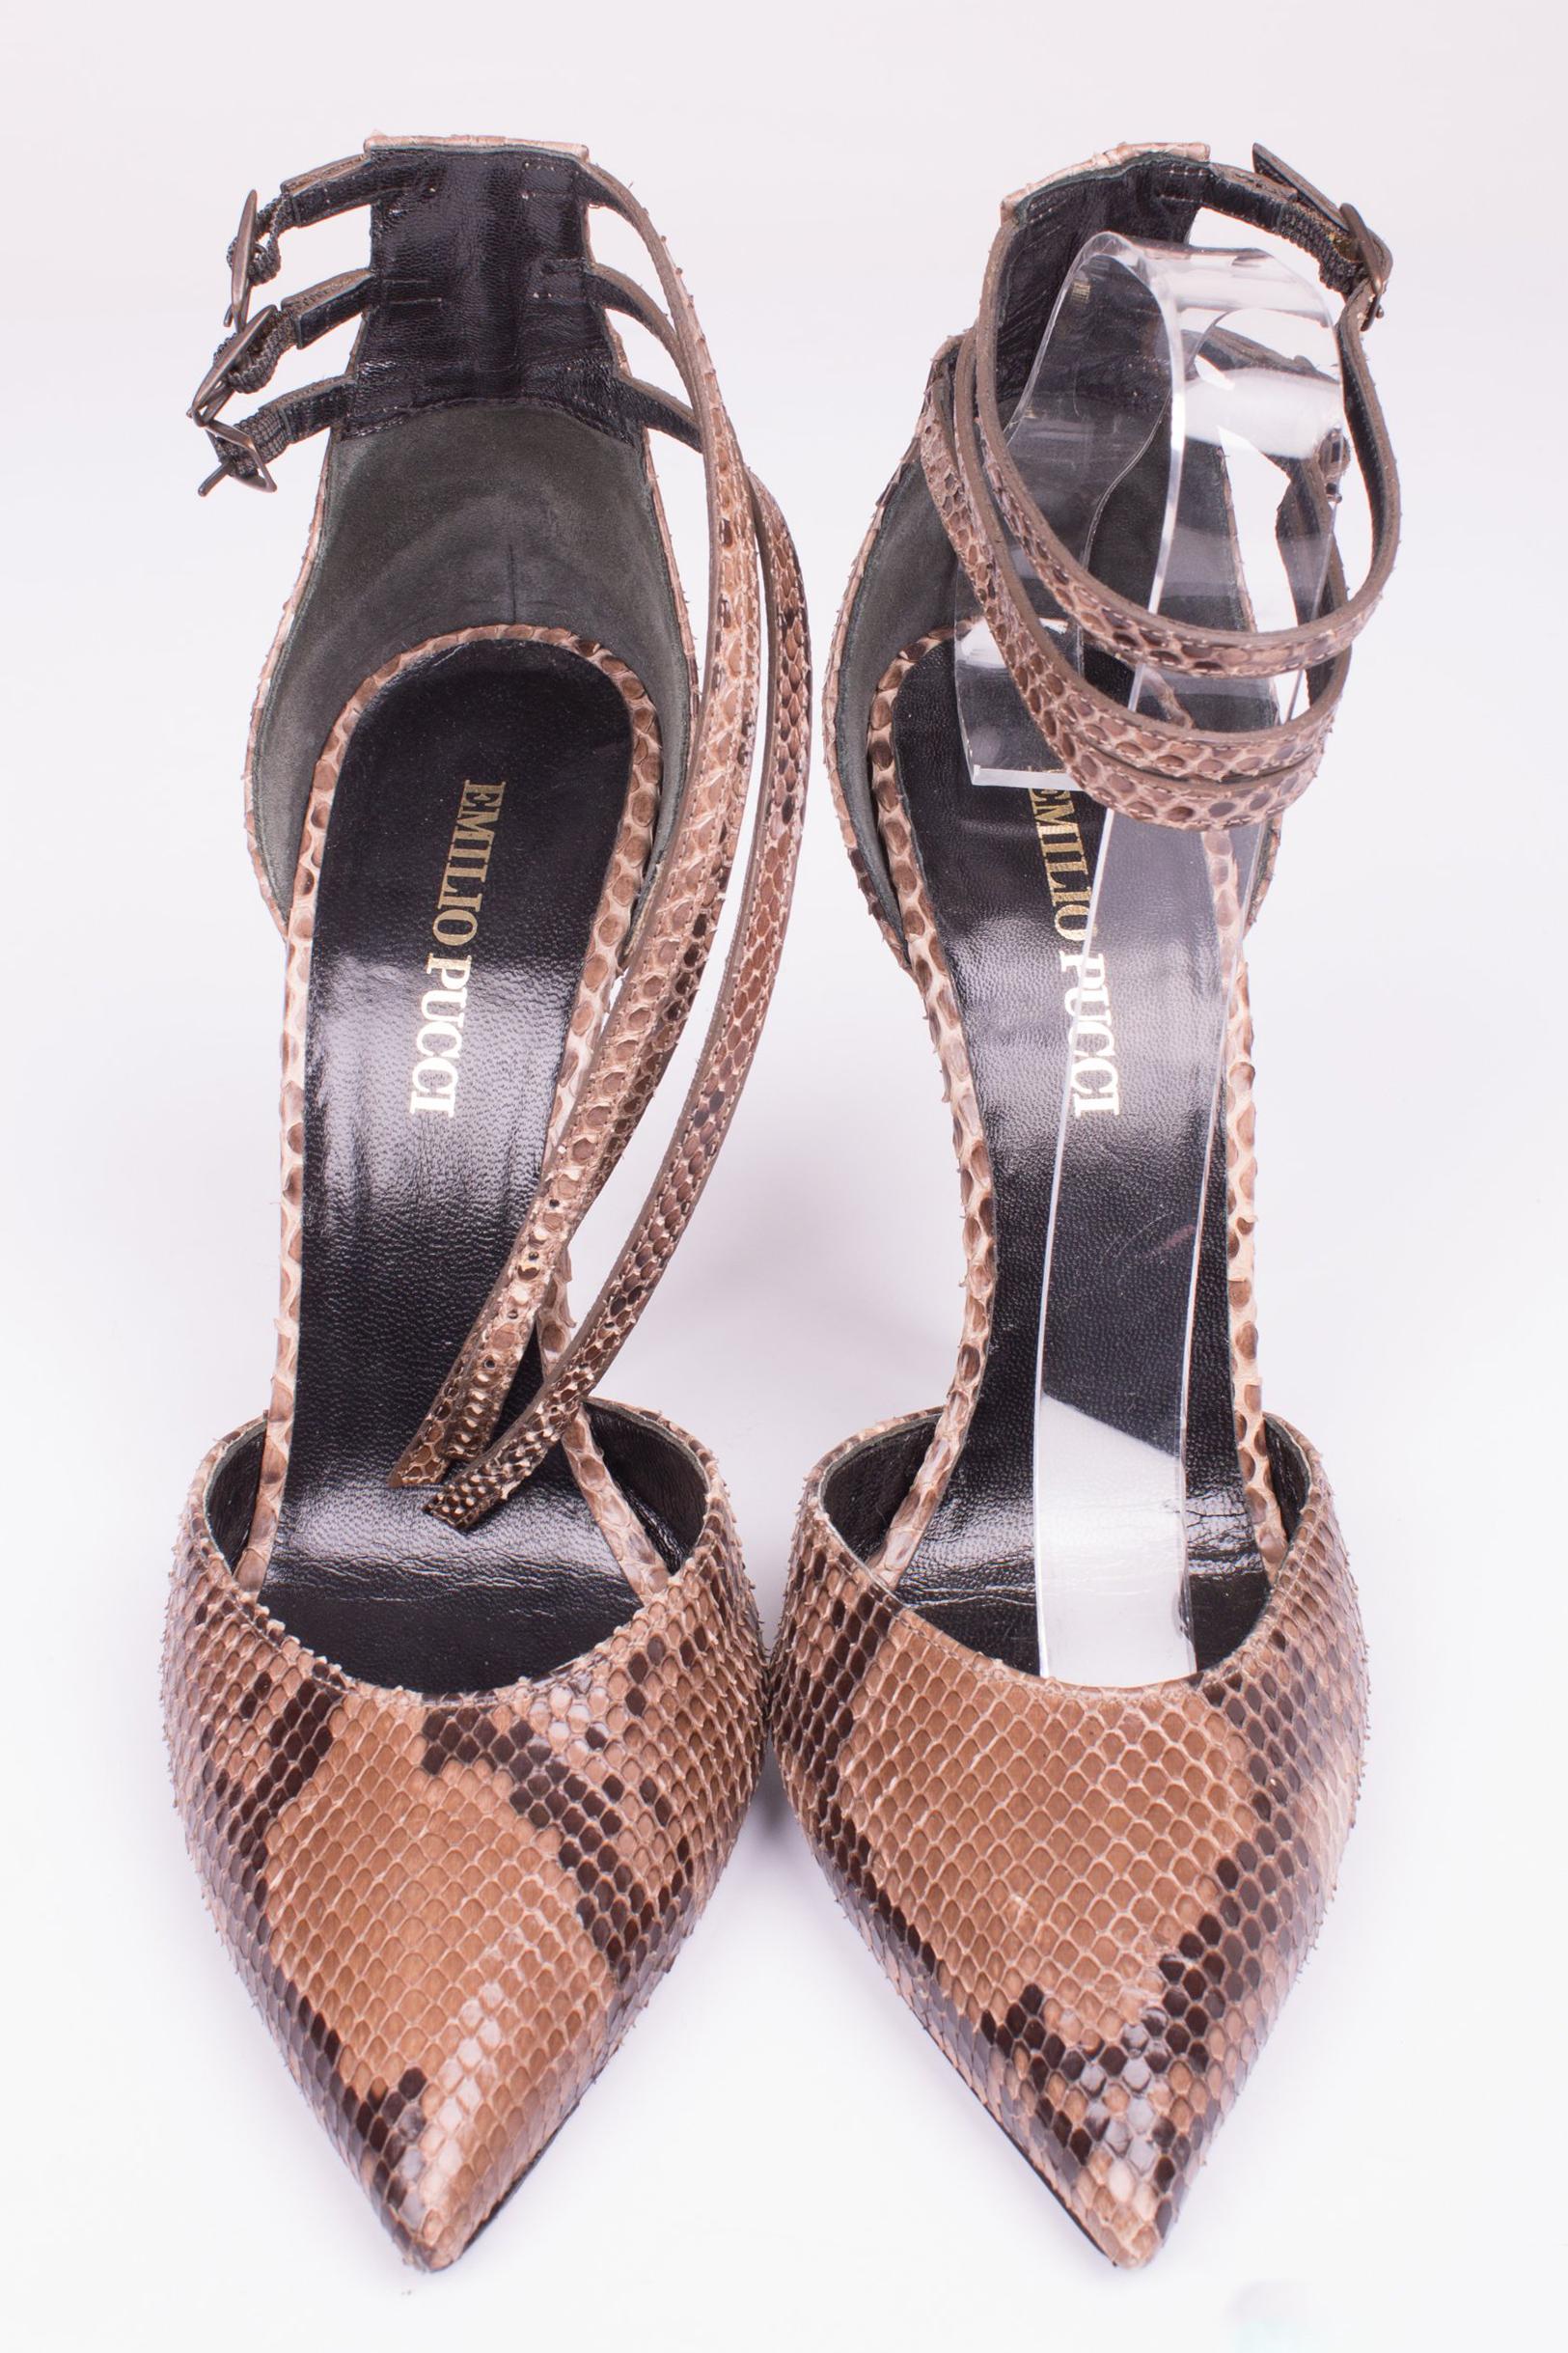 Pumps by Emilio Pucci fully made of brown python leather.

The slanted heel of this shoe measures 12 centimeters, no platform. A pointy toe. Three straps around the ankle with a small buckle. Fully lined with black leather.

These shoes have